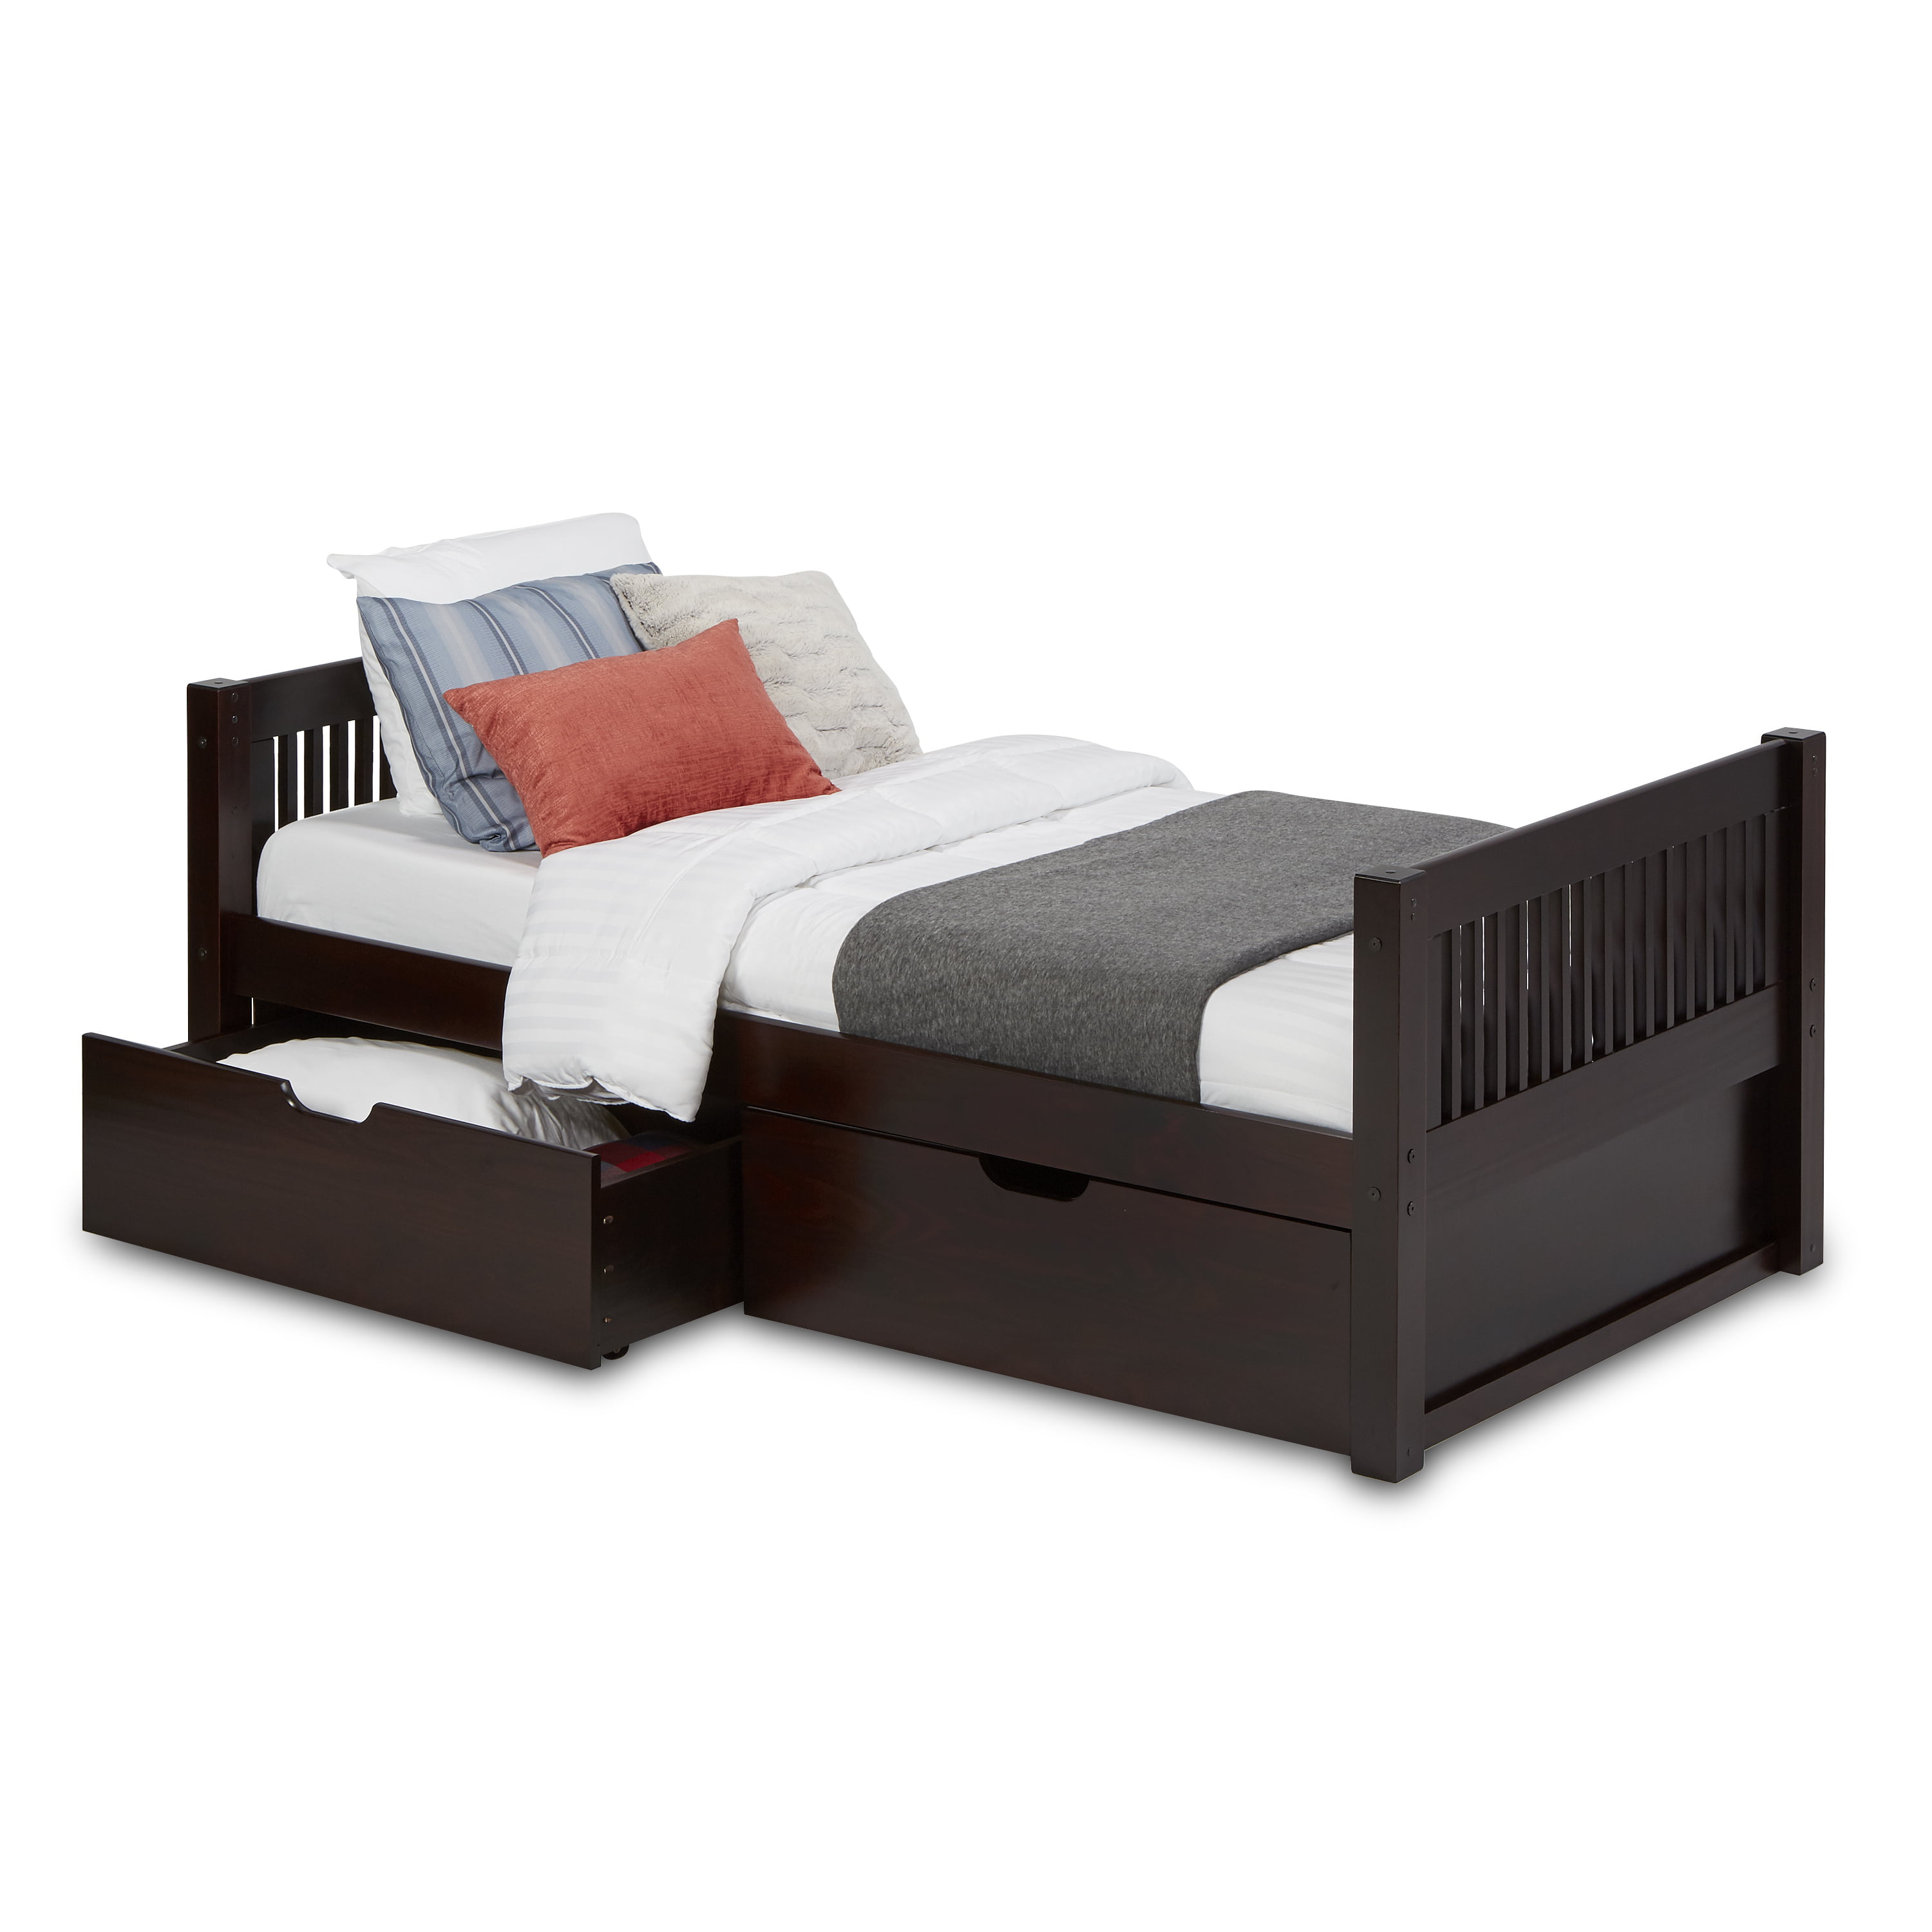 Camaflexi Twin Size Platform Bed with Drawers - Mission Headboard ...